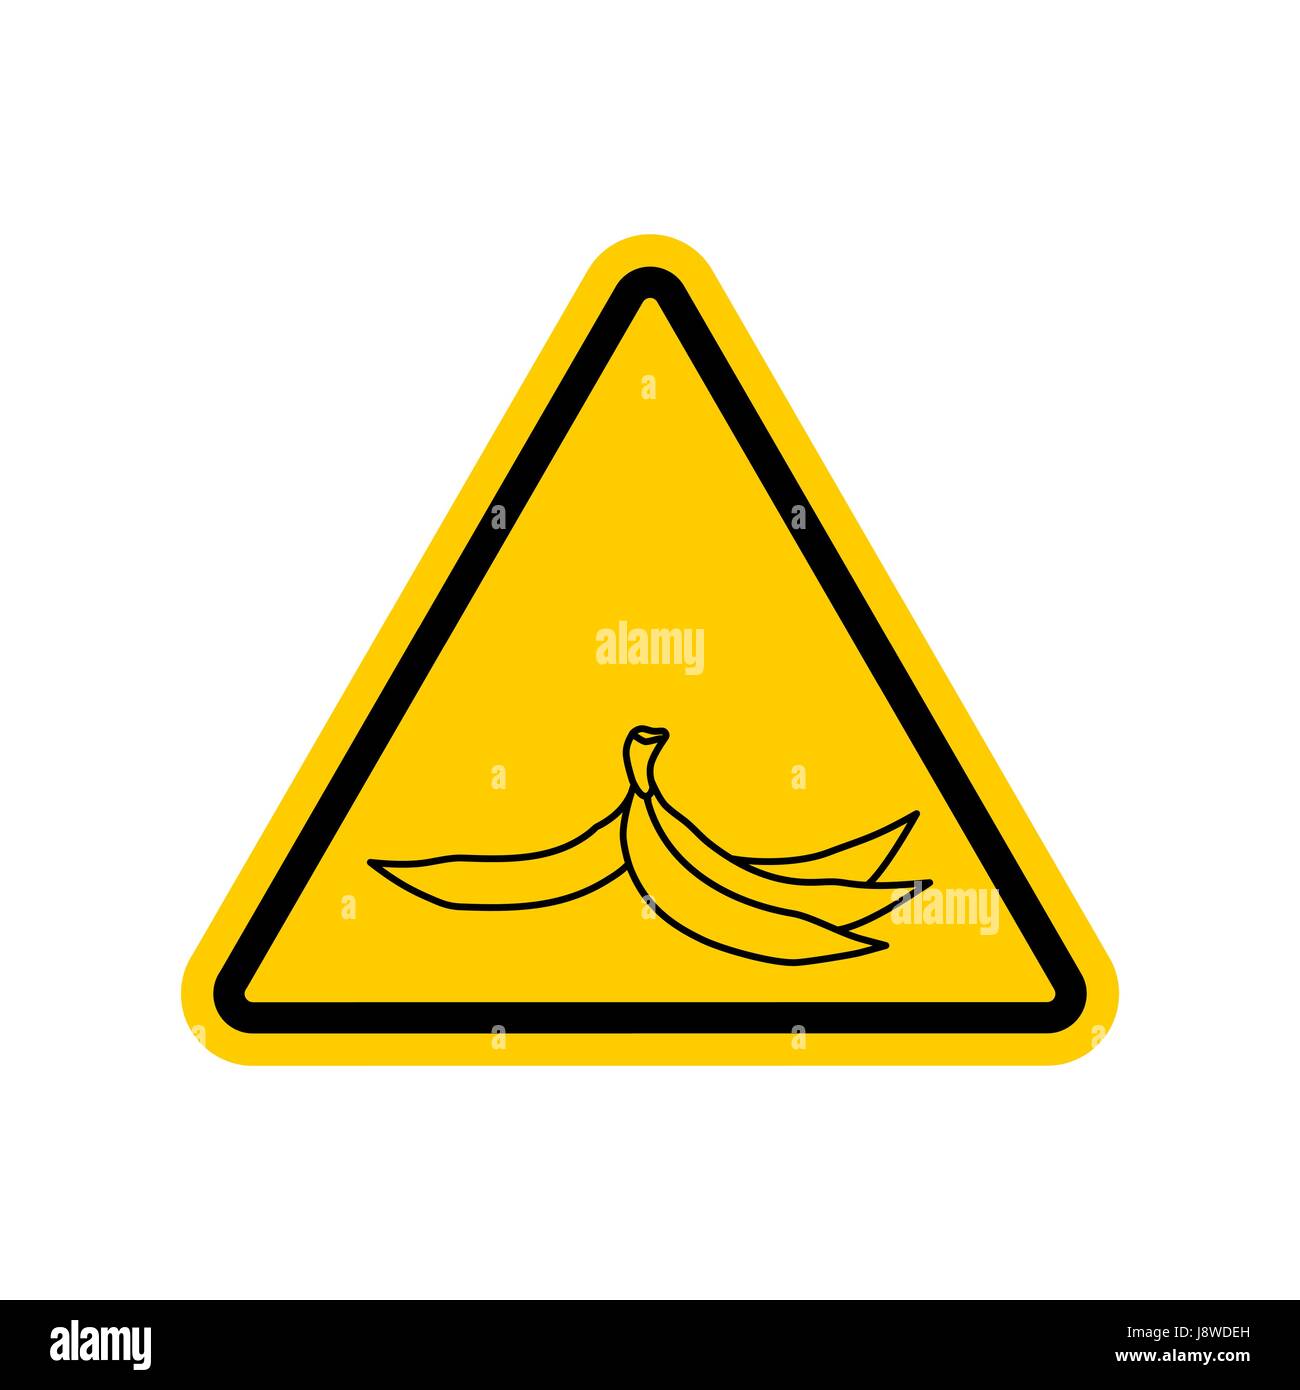 Attention garbage. Peel from banana on yellow triangle. Road sign Caution trash Stock Vector